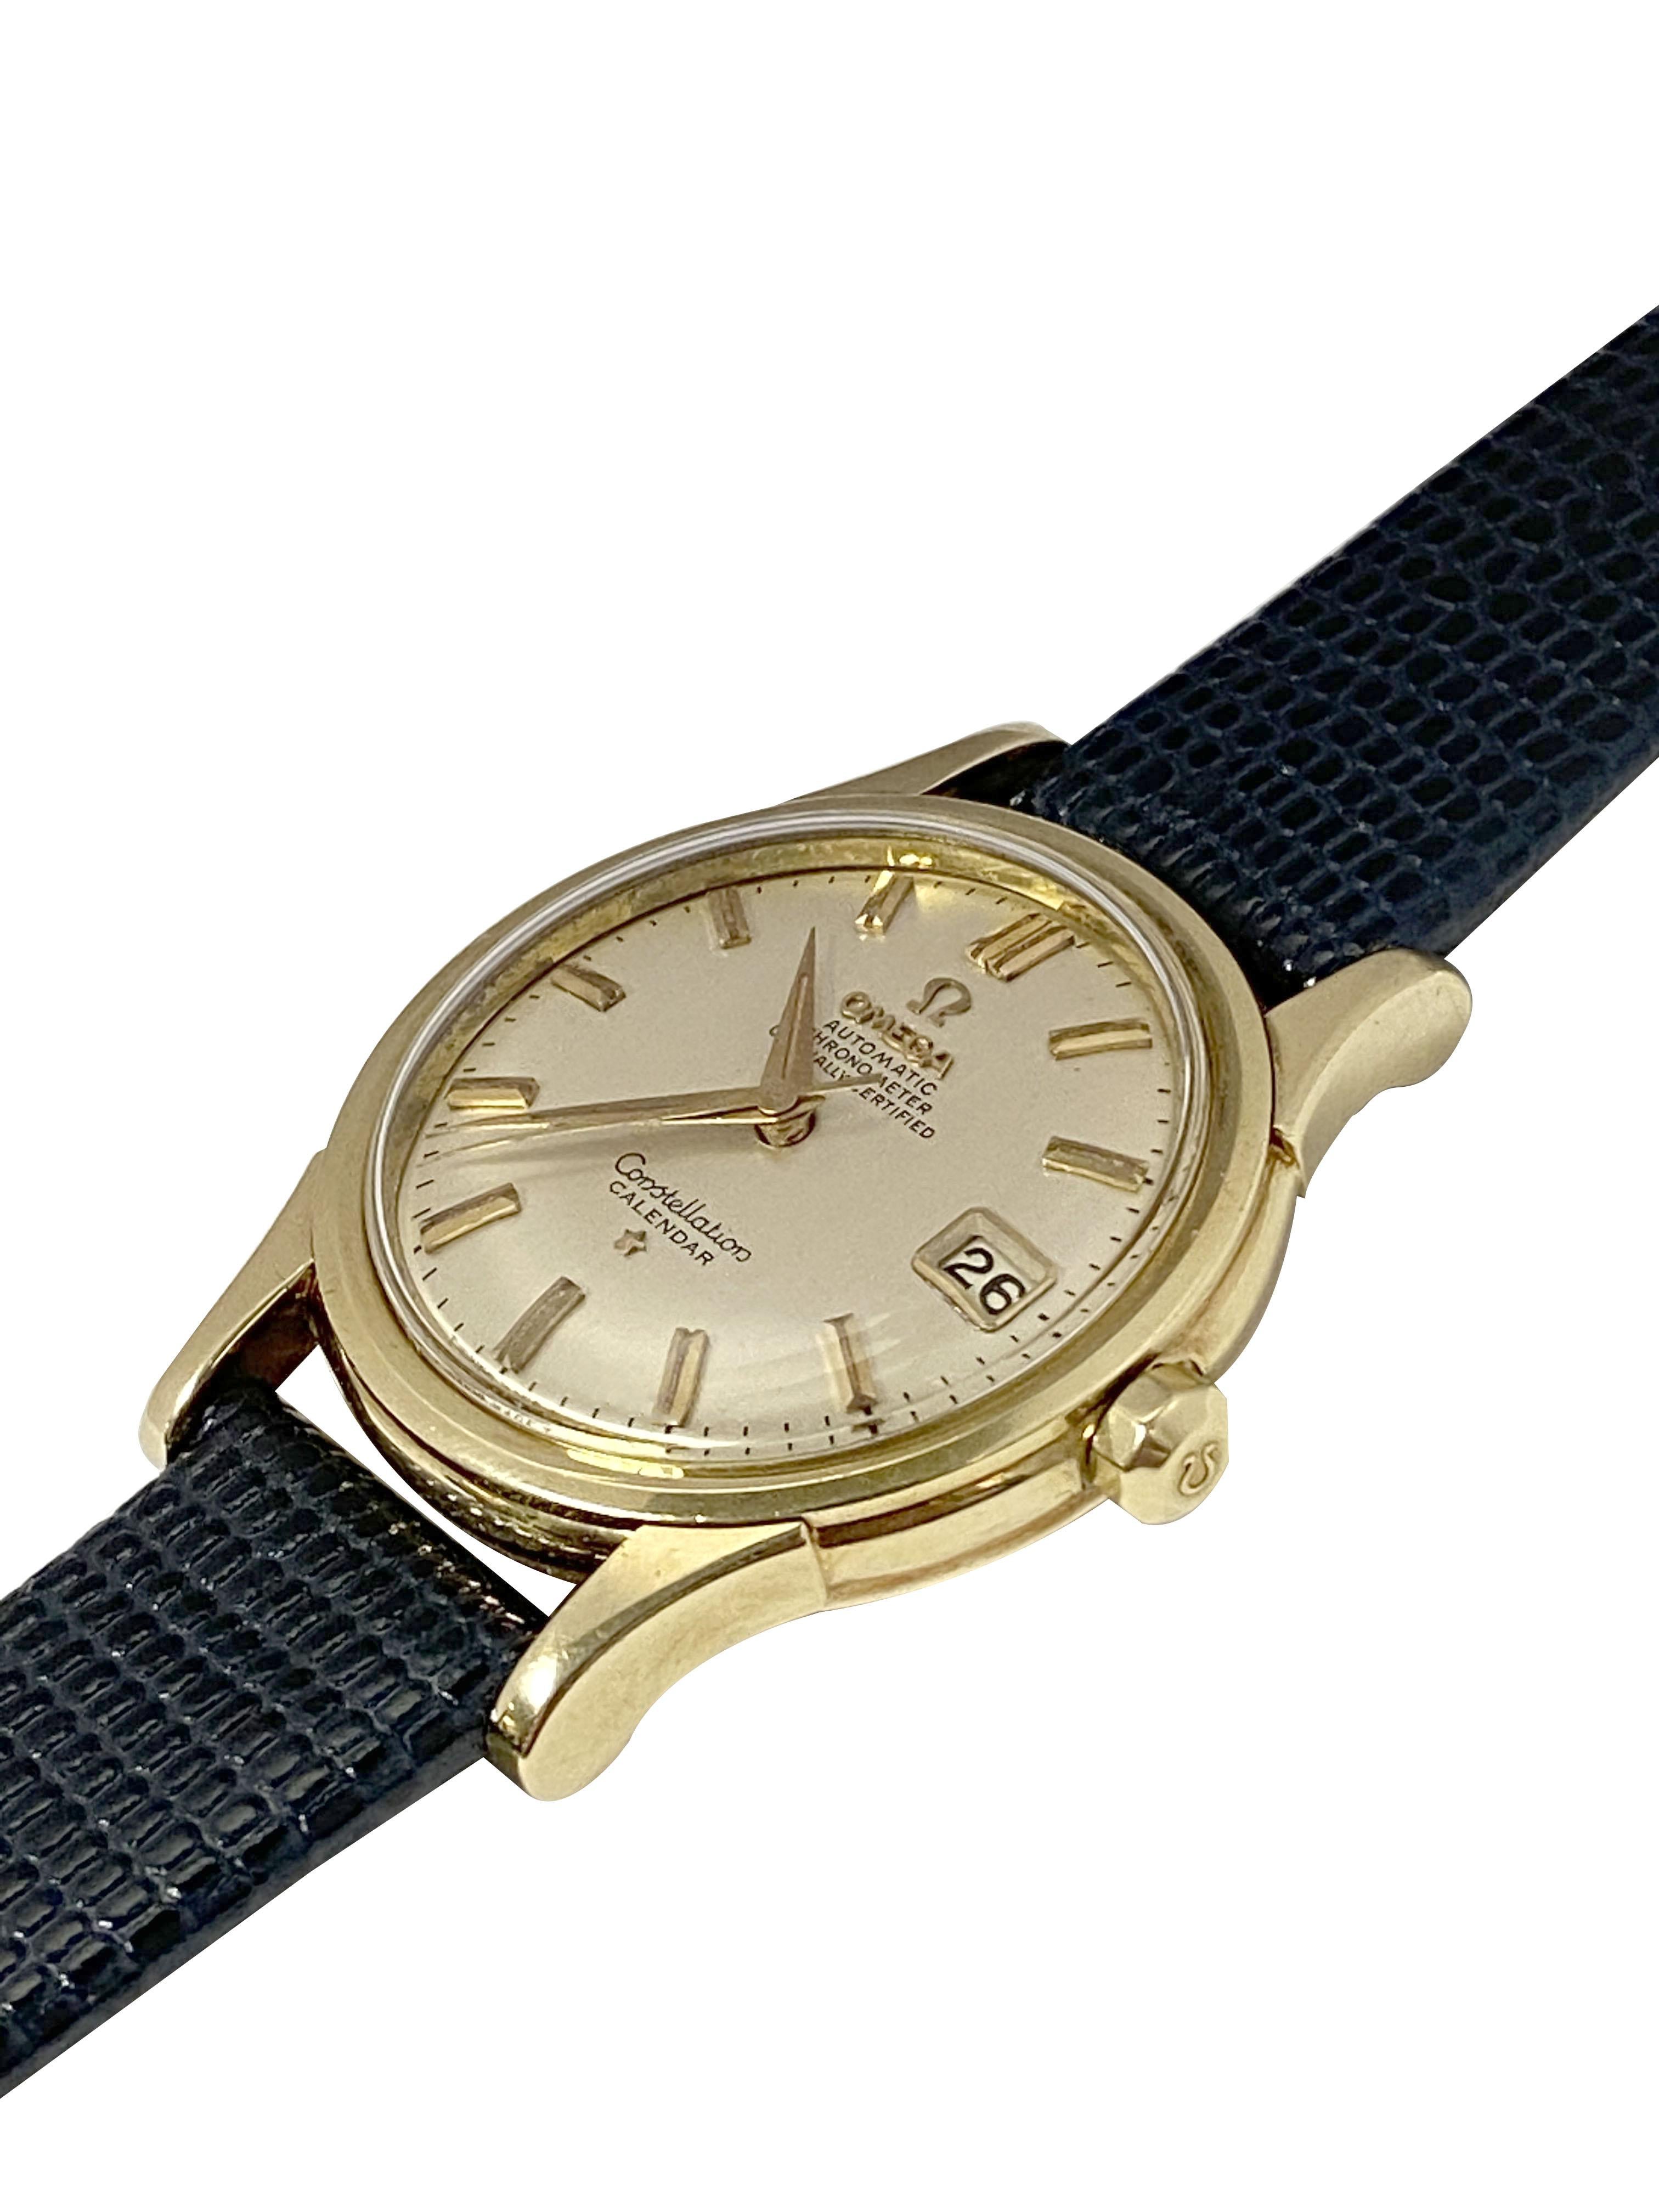 Circa late 1960s Omega Constellation Wrist Watch, 34 M.M. 14K Yellow Gold 2 piece case with Observatory inset on the case back, Automatic, self winding Caliber 504 24 jewel Gilt lever movement. Original Silver Satin dial with Raised Gold markers,